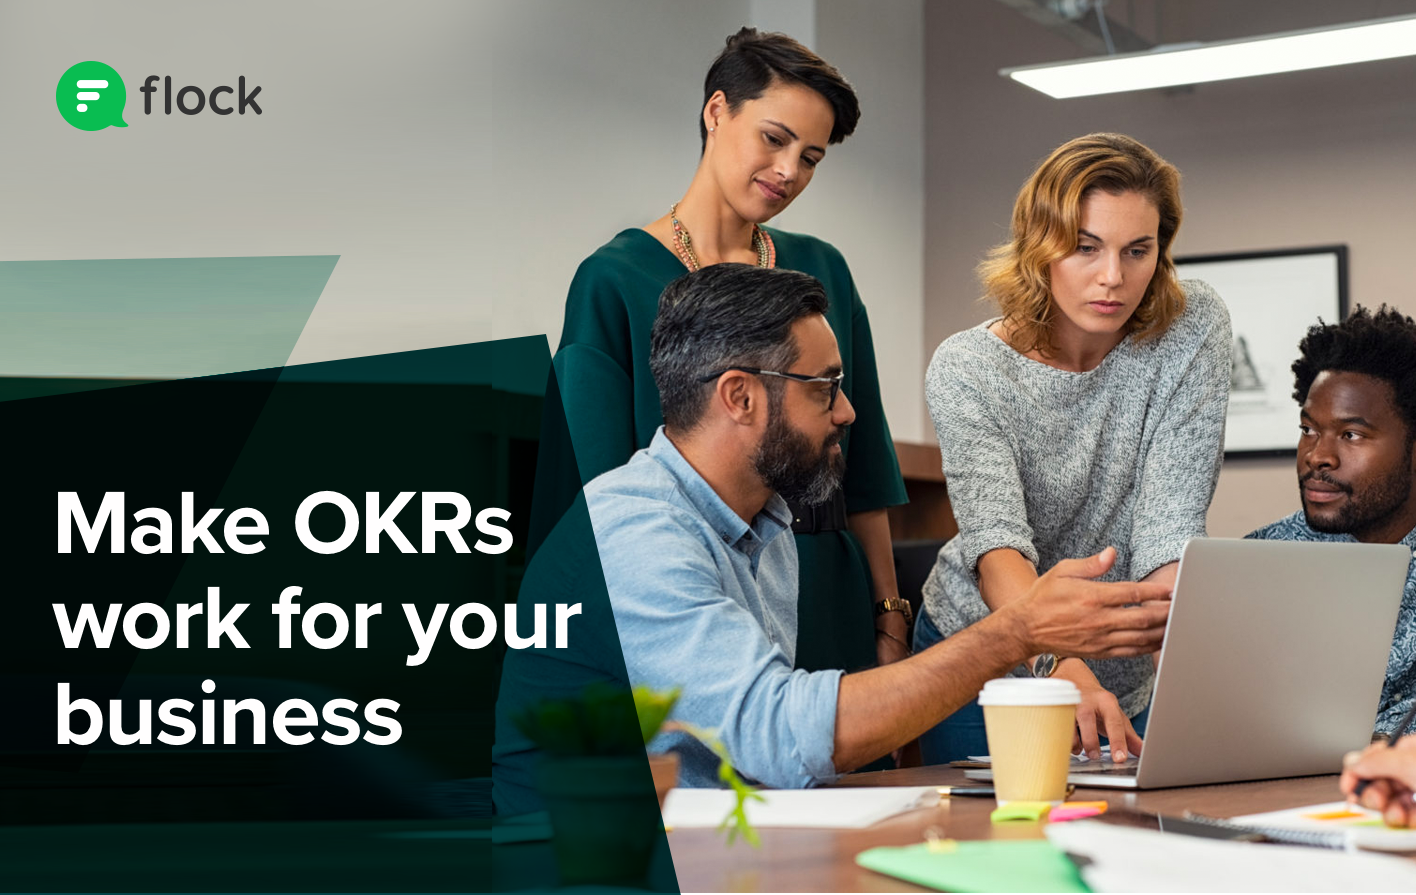 Make OKRs work for your business